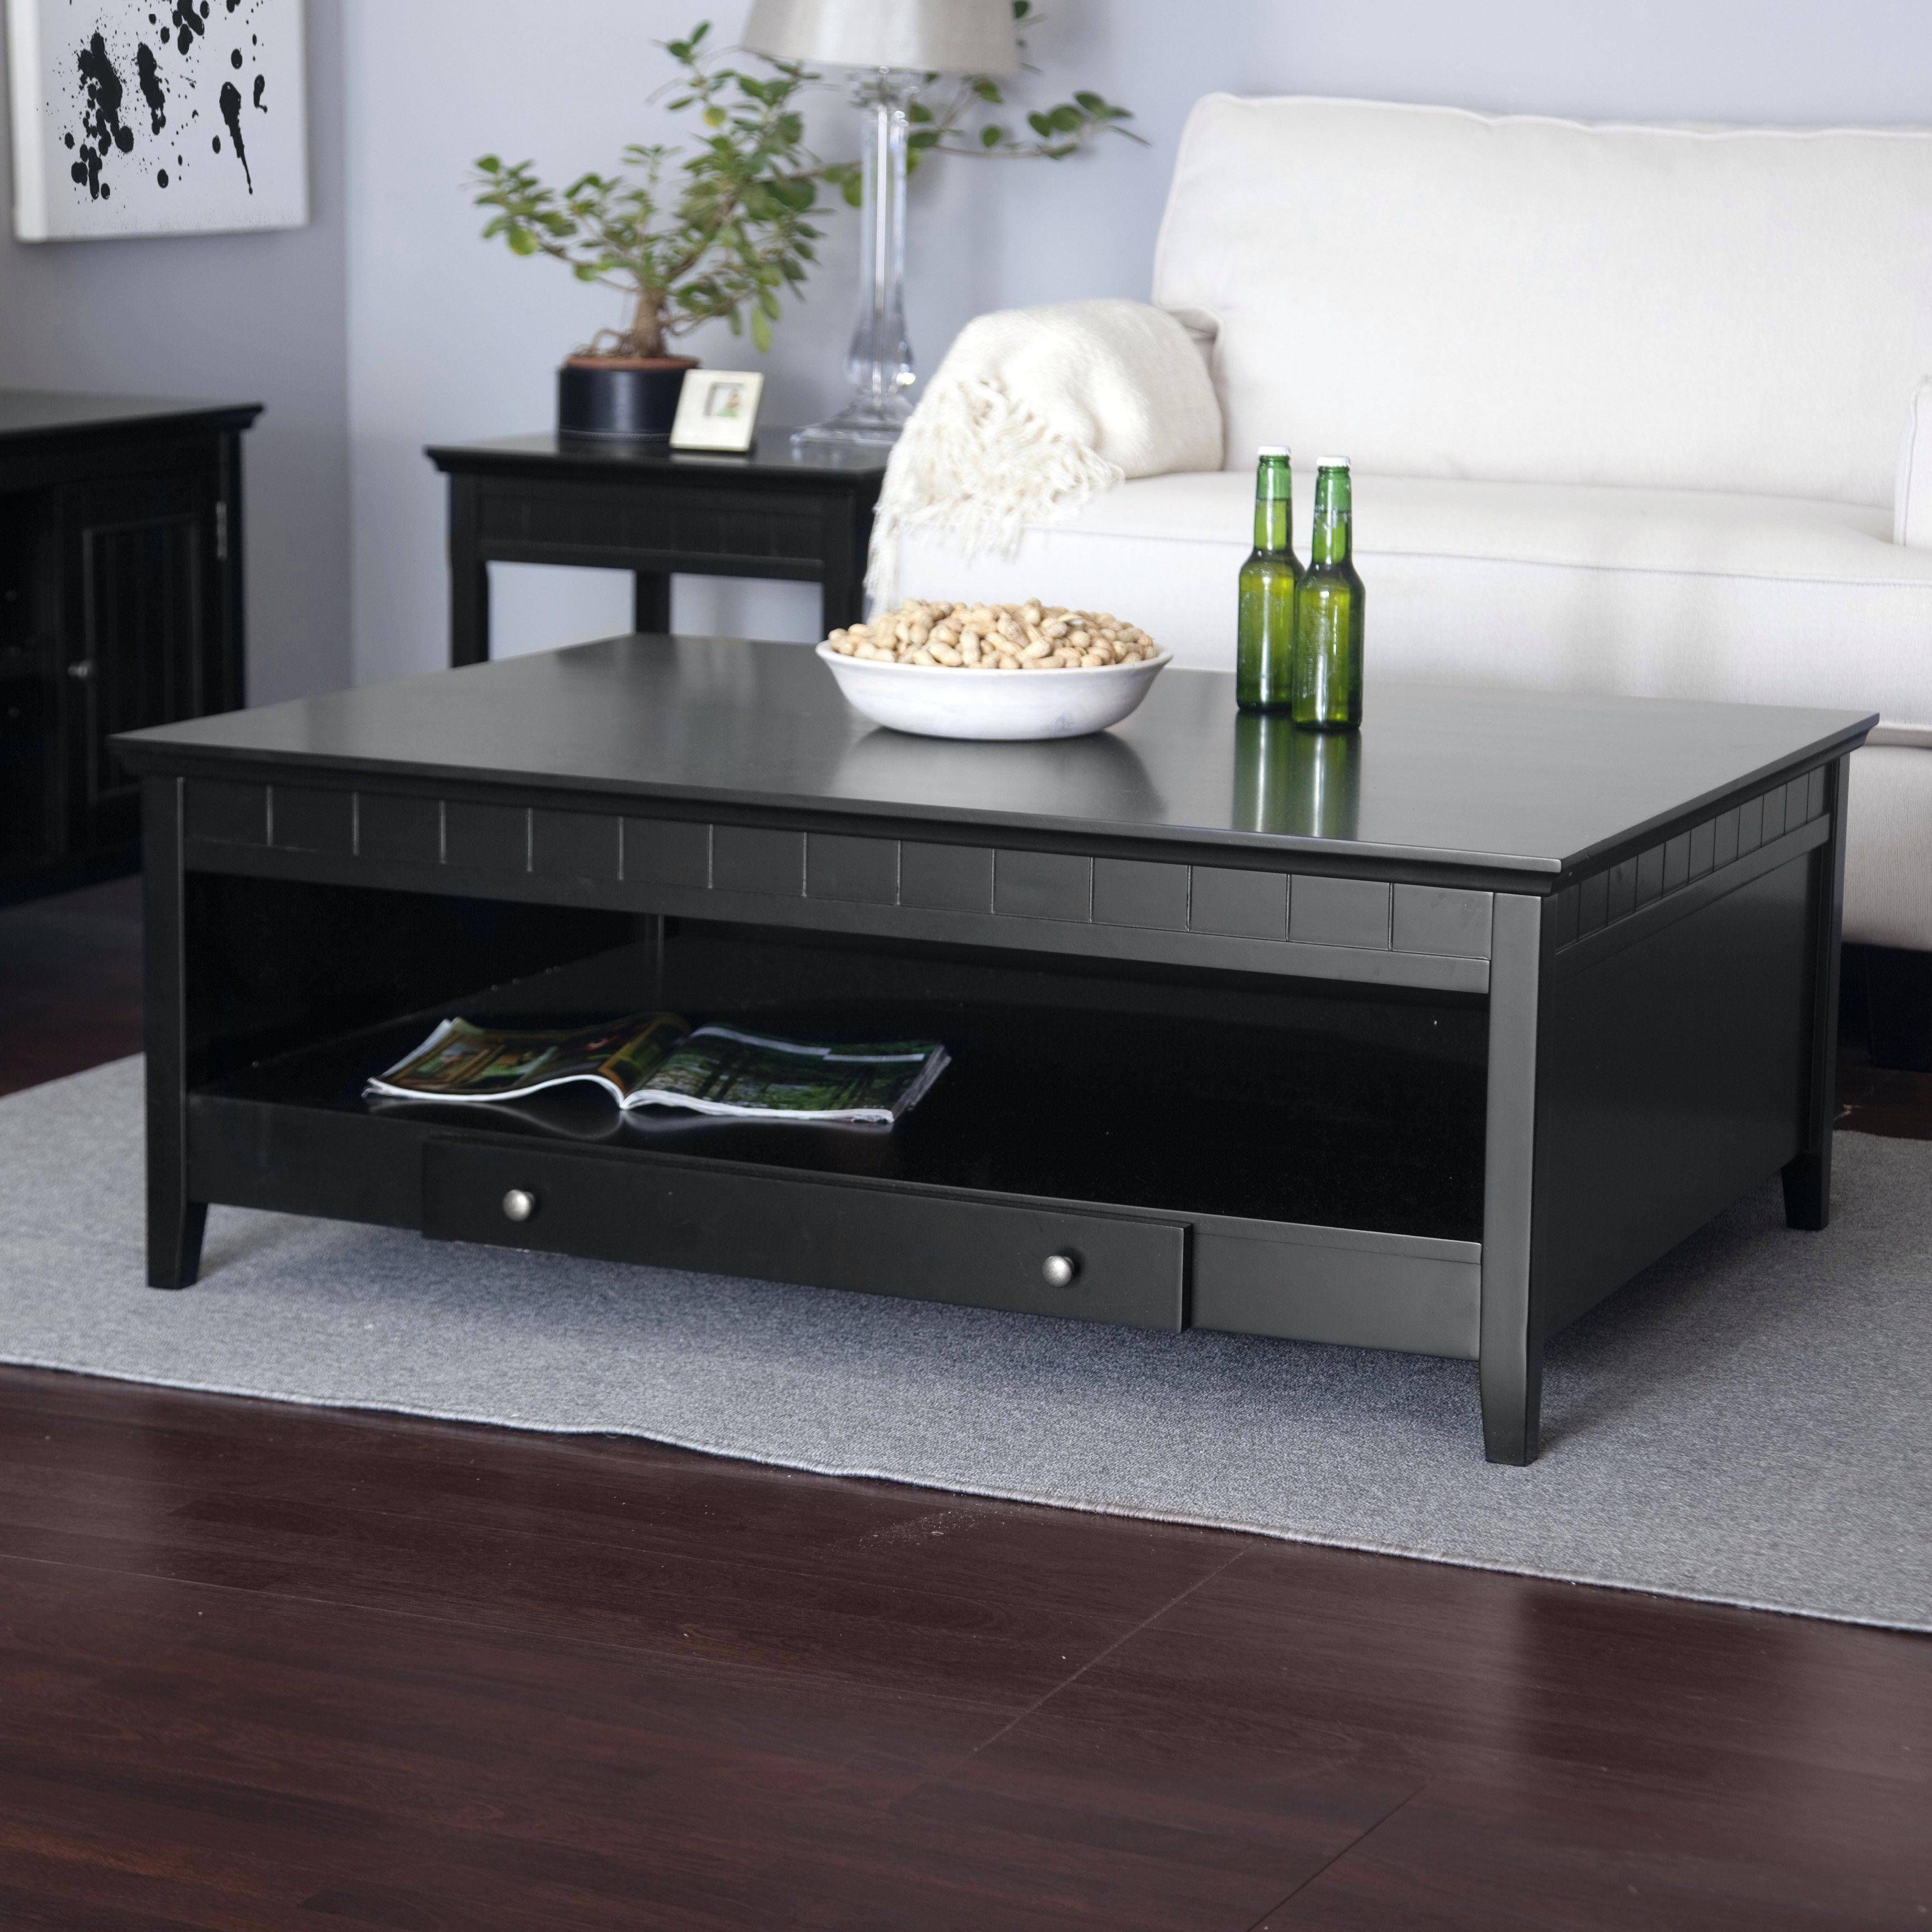 Coffee Table: Square Coffee Table Storage Large Round Coffee Intended For Square Coffee Tables With Storage (View 21 of 30)